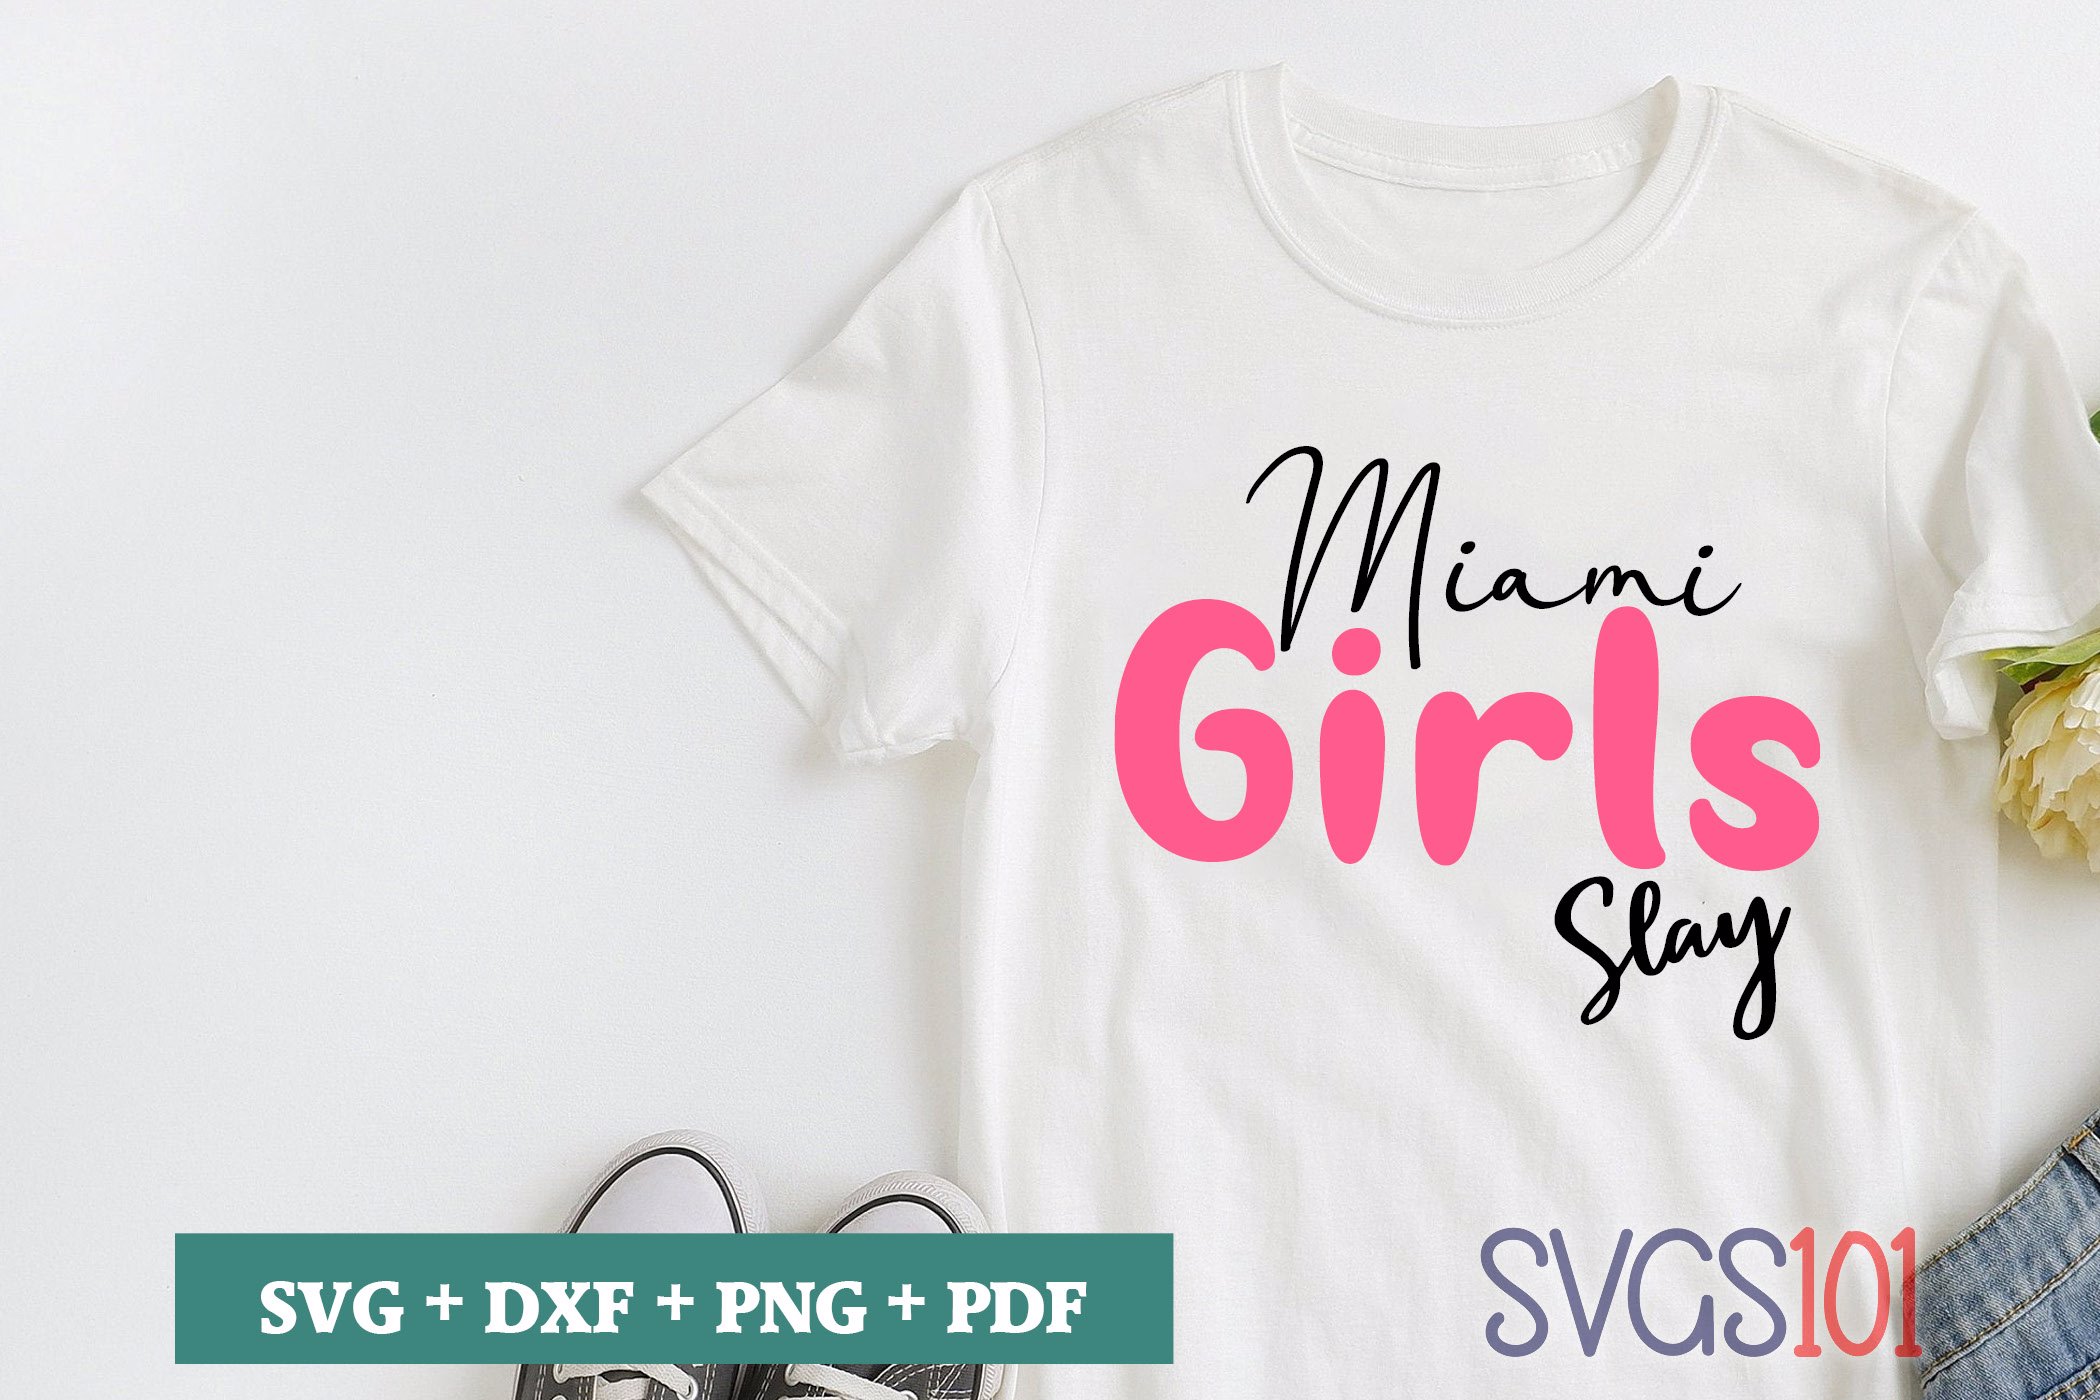 Download Miami Girls Slay SVG Cuttable file - DXF, EPS, PNG, PDF ...